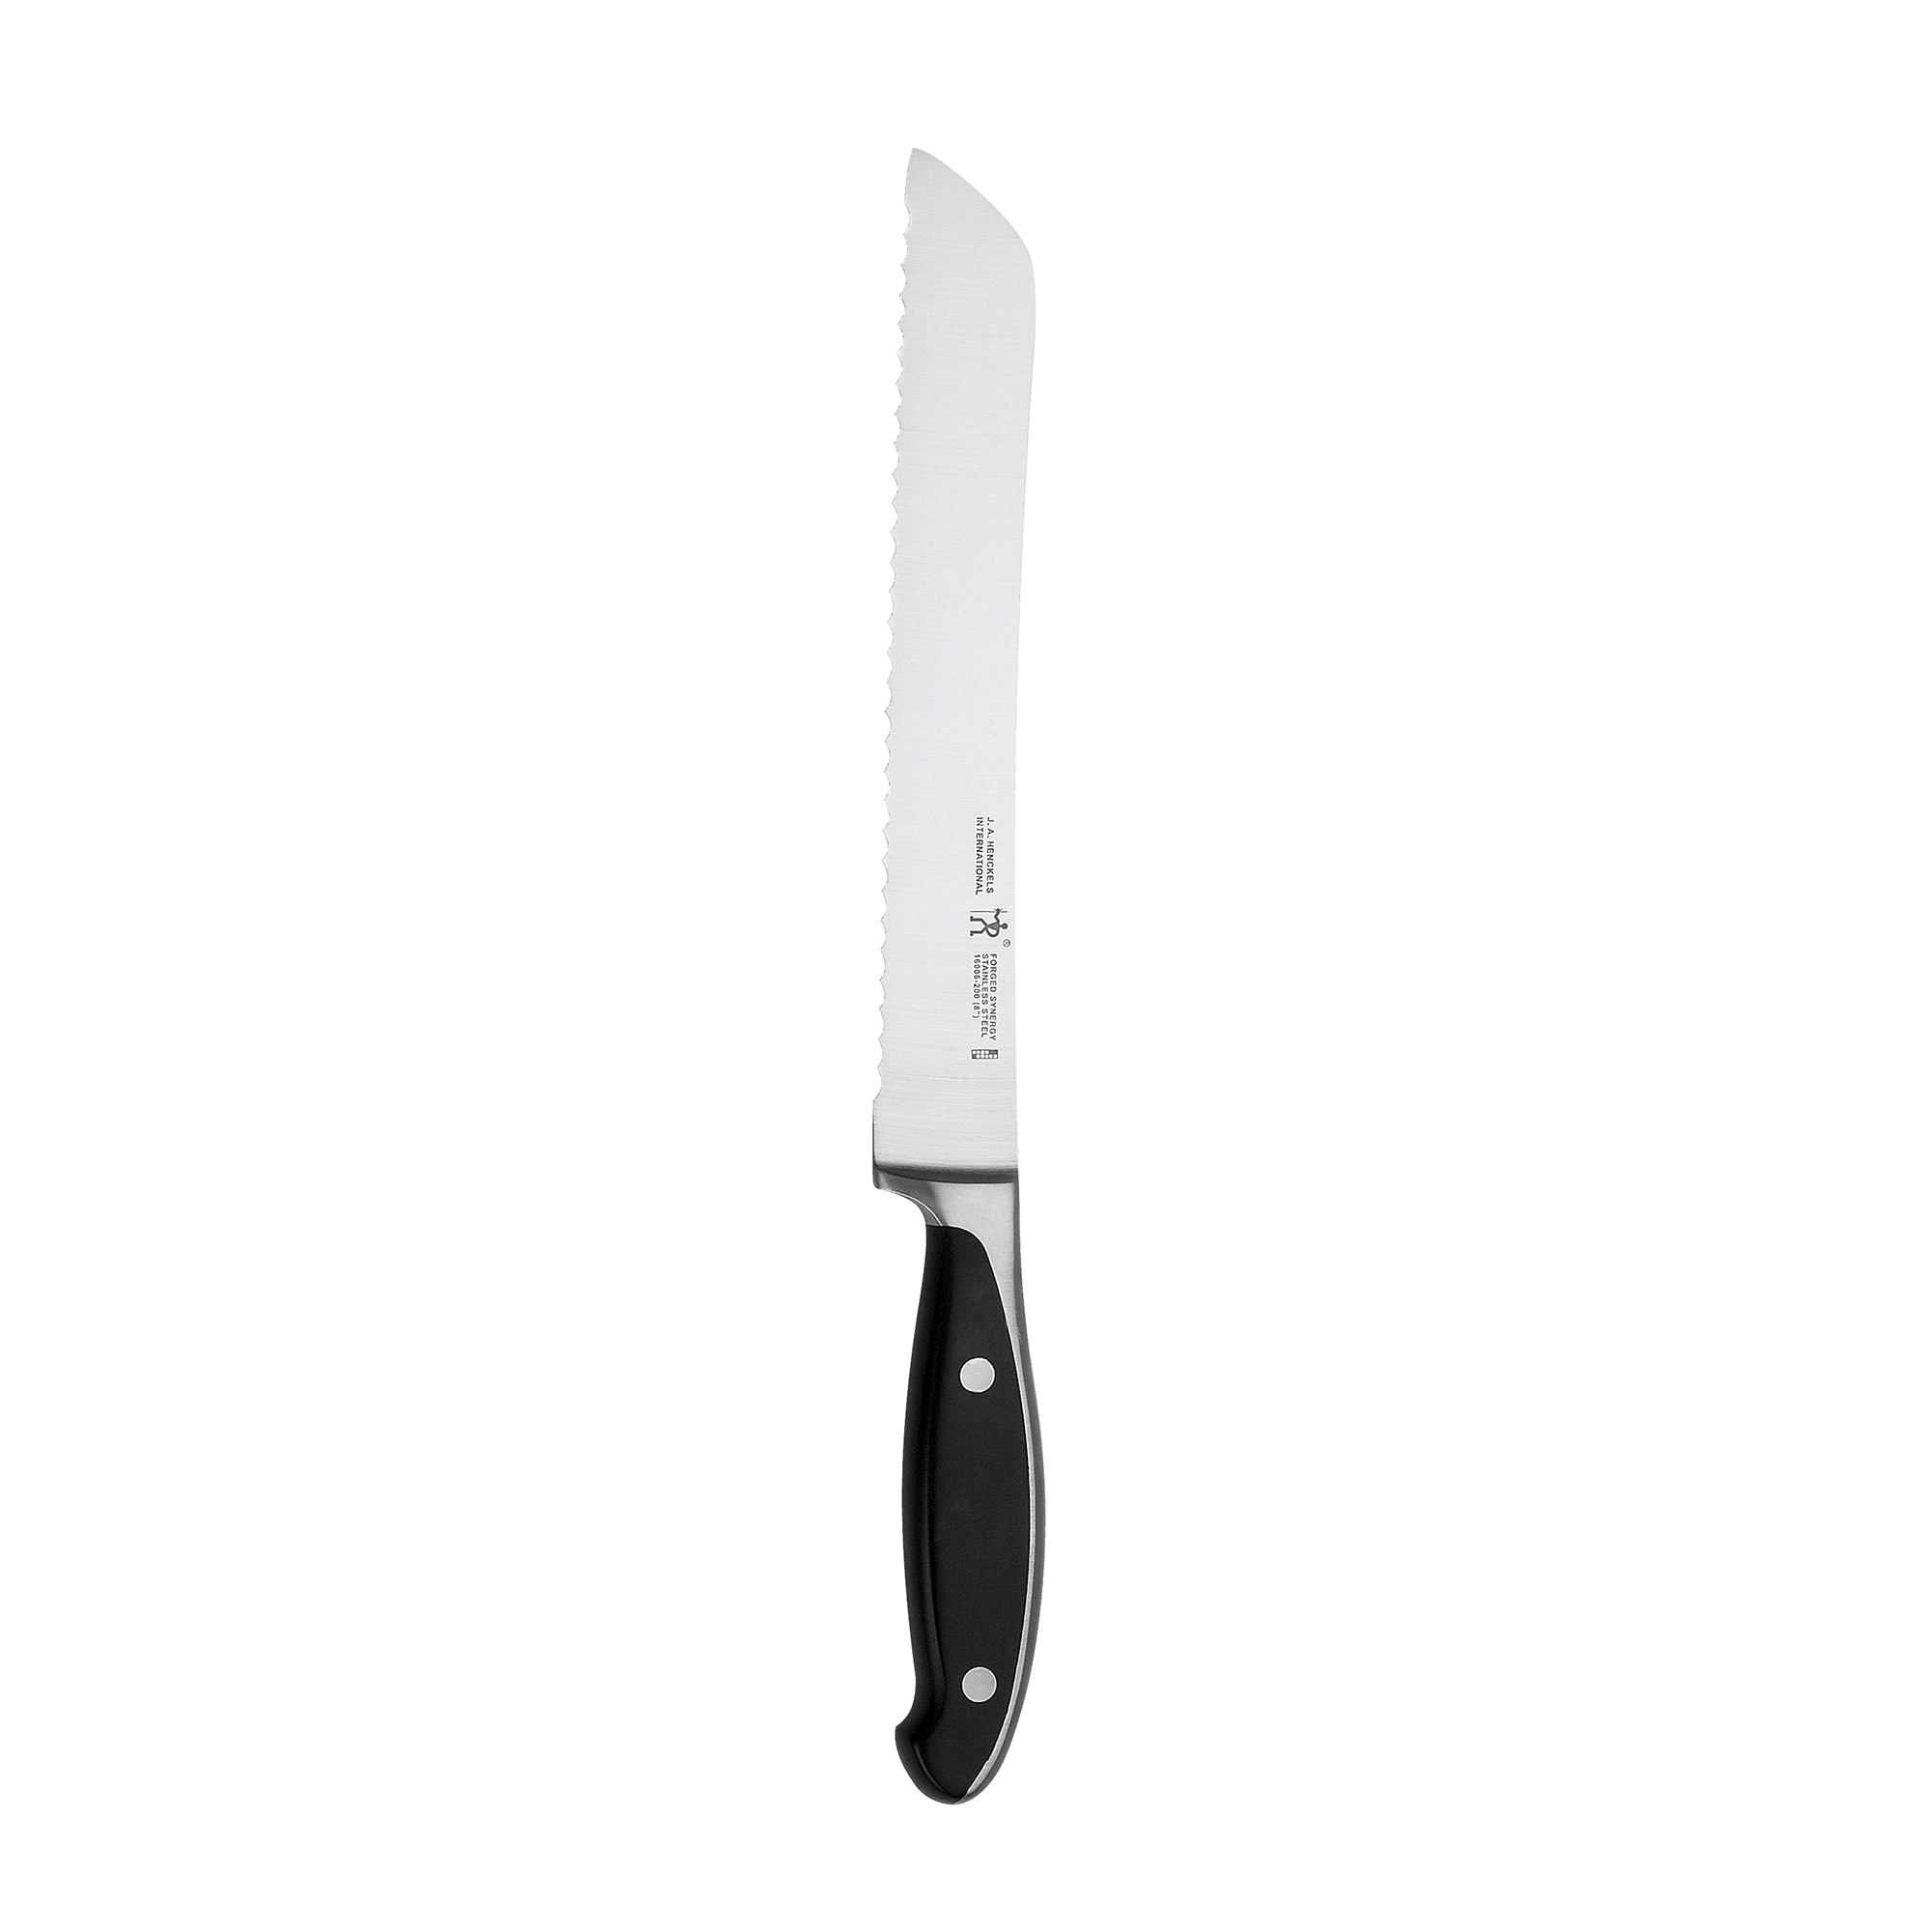 Henckels International Forged Synergy 3-Inch Paring Knife